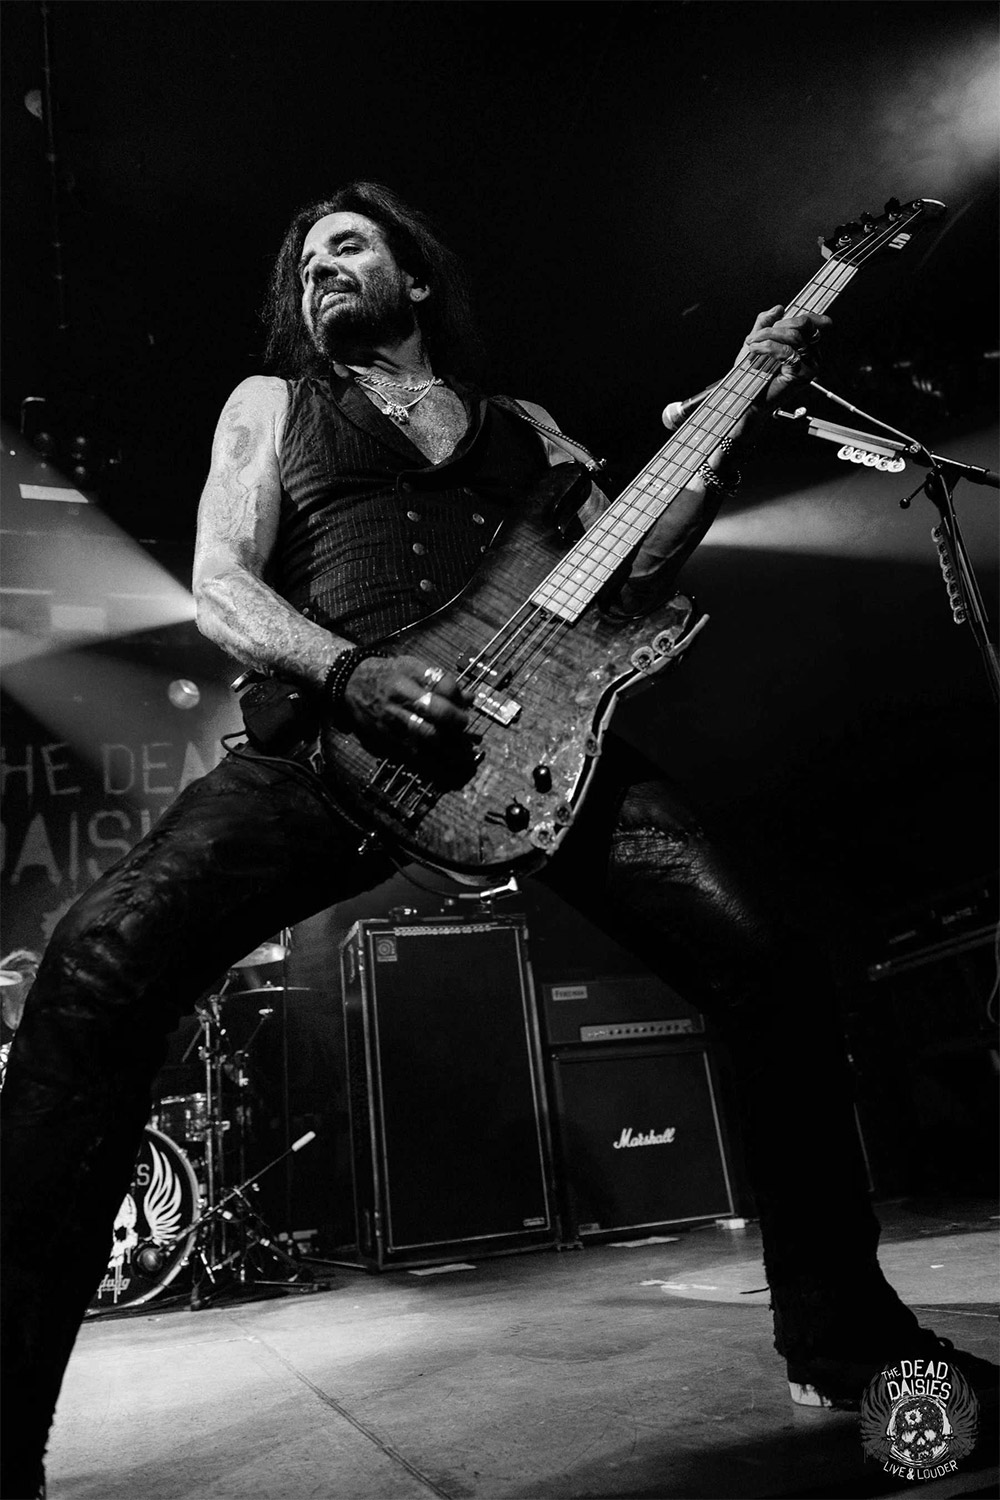 Marco Mendoza playing bass on stage